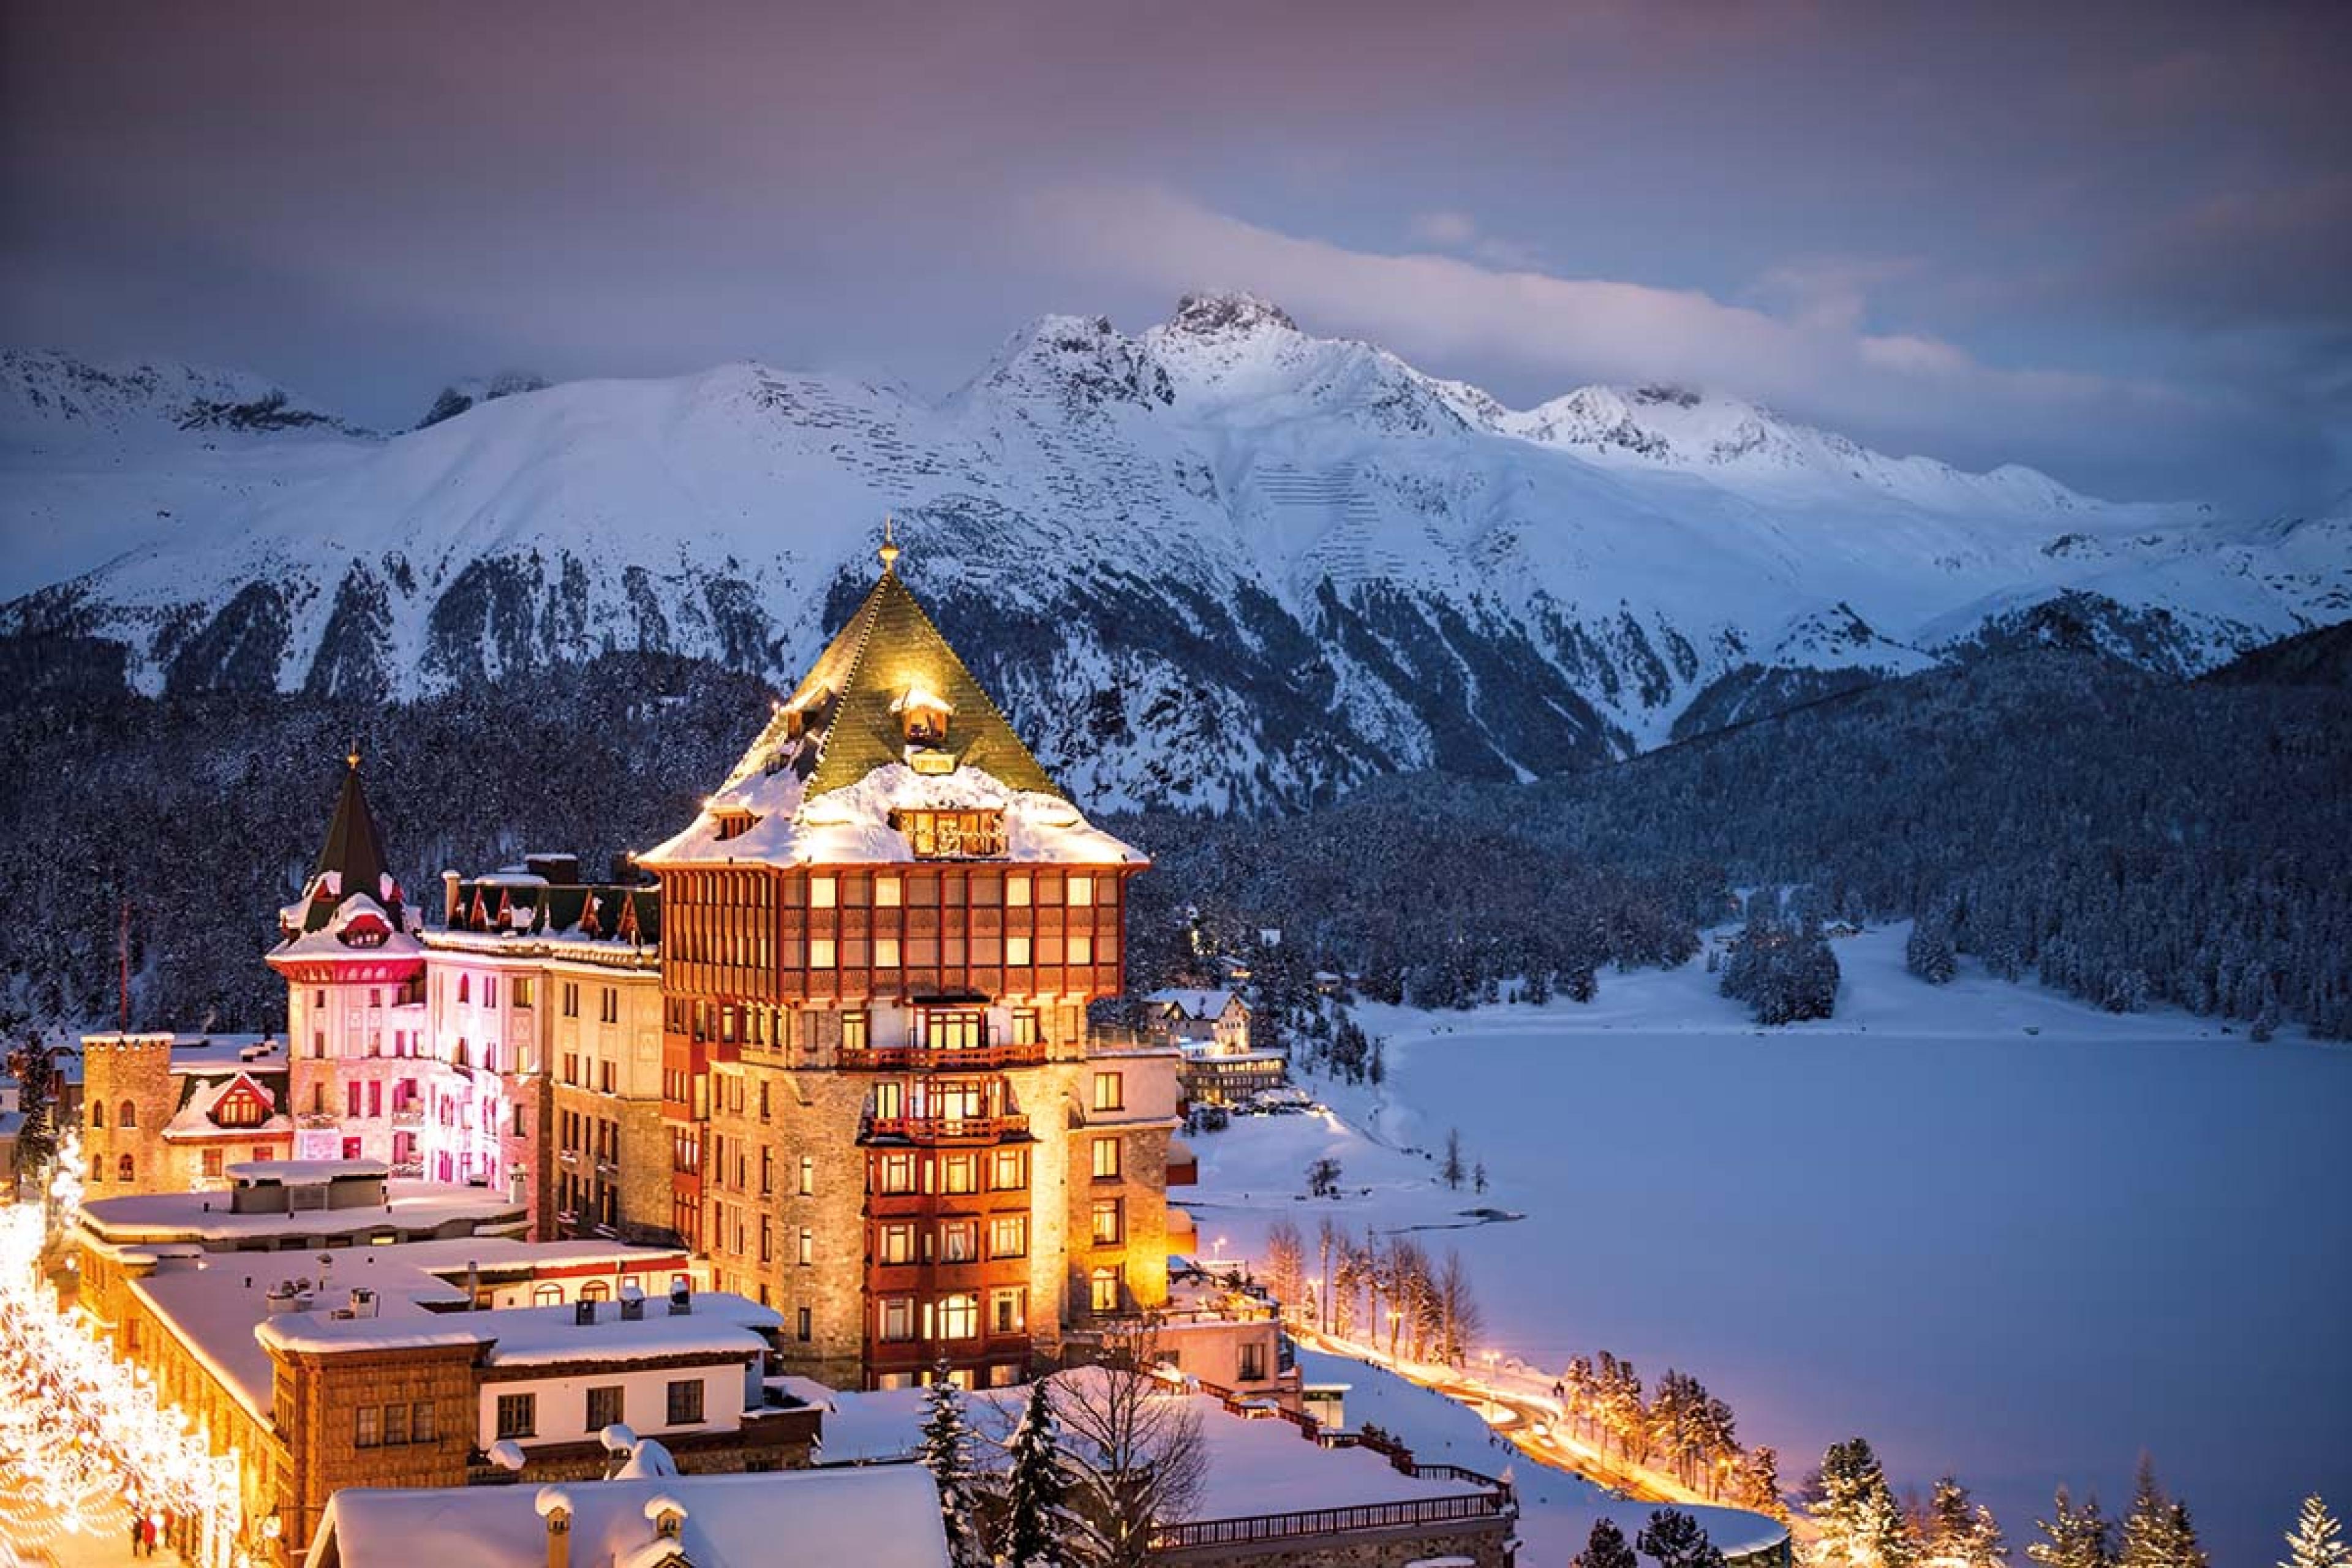 lit up building surrounded by snowy mountains